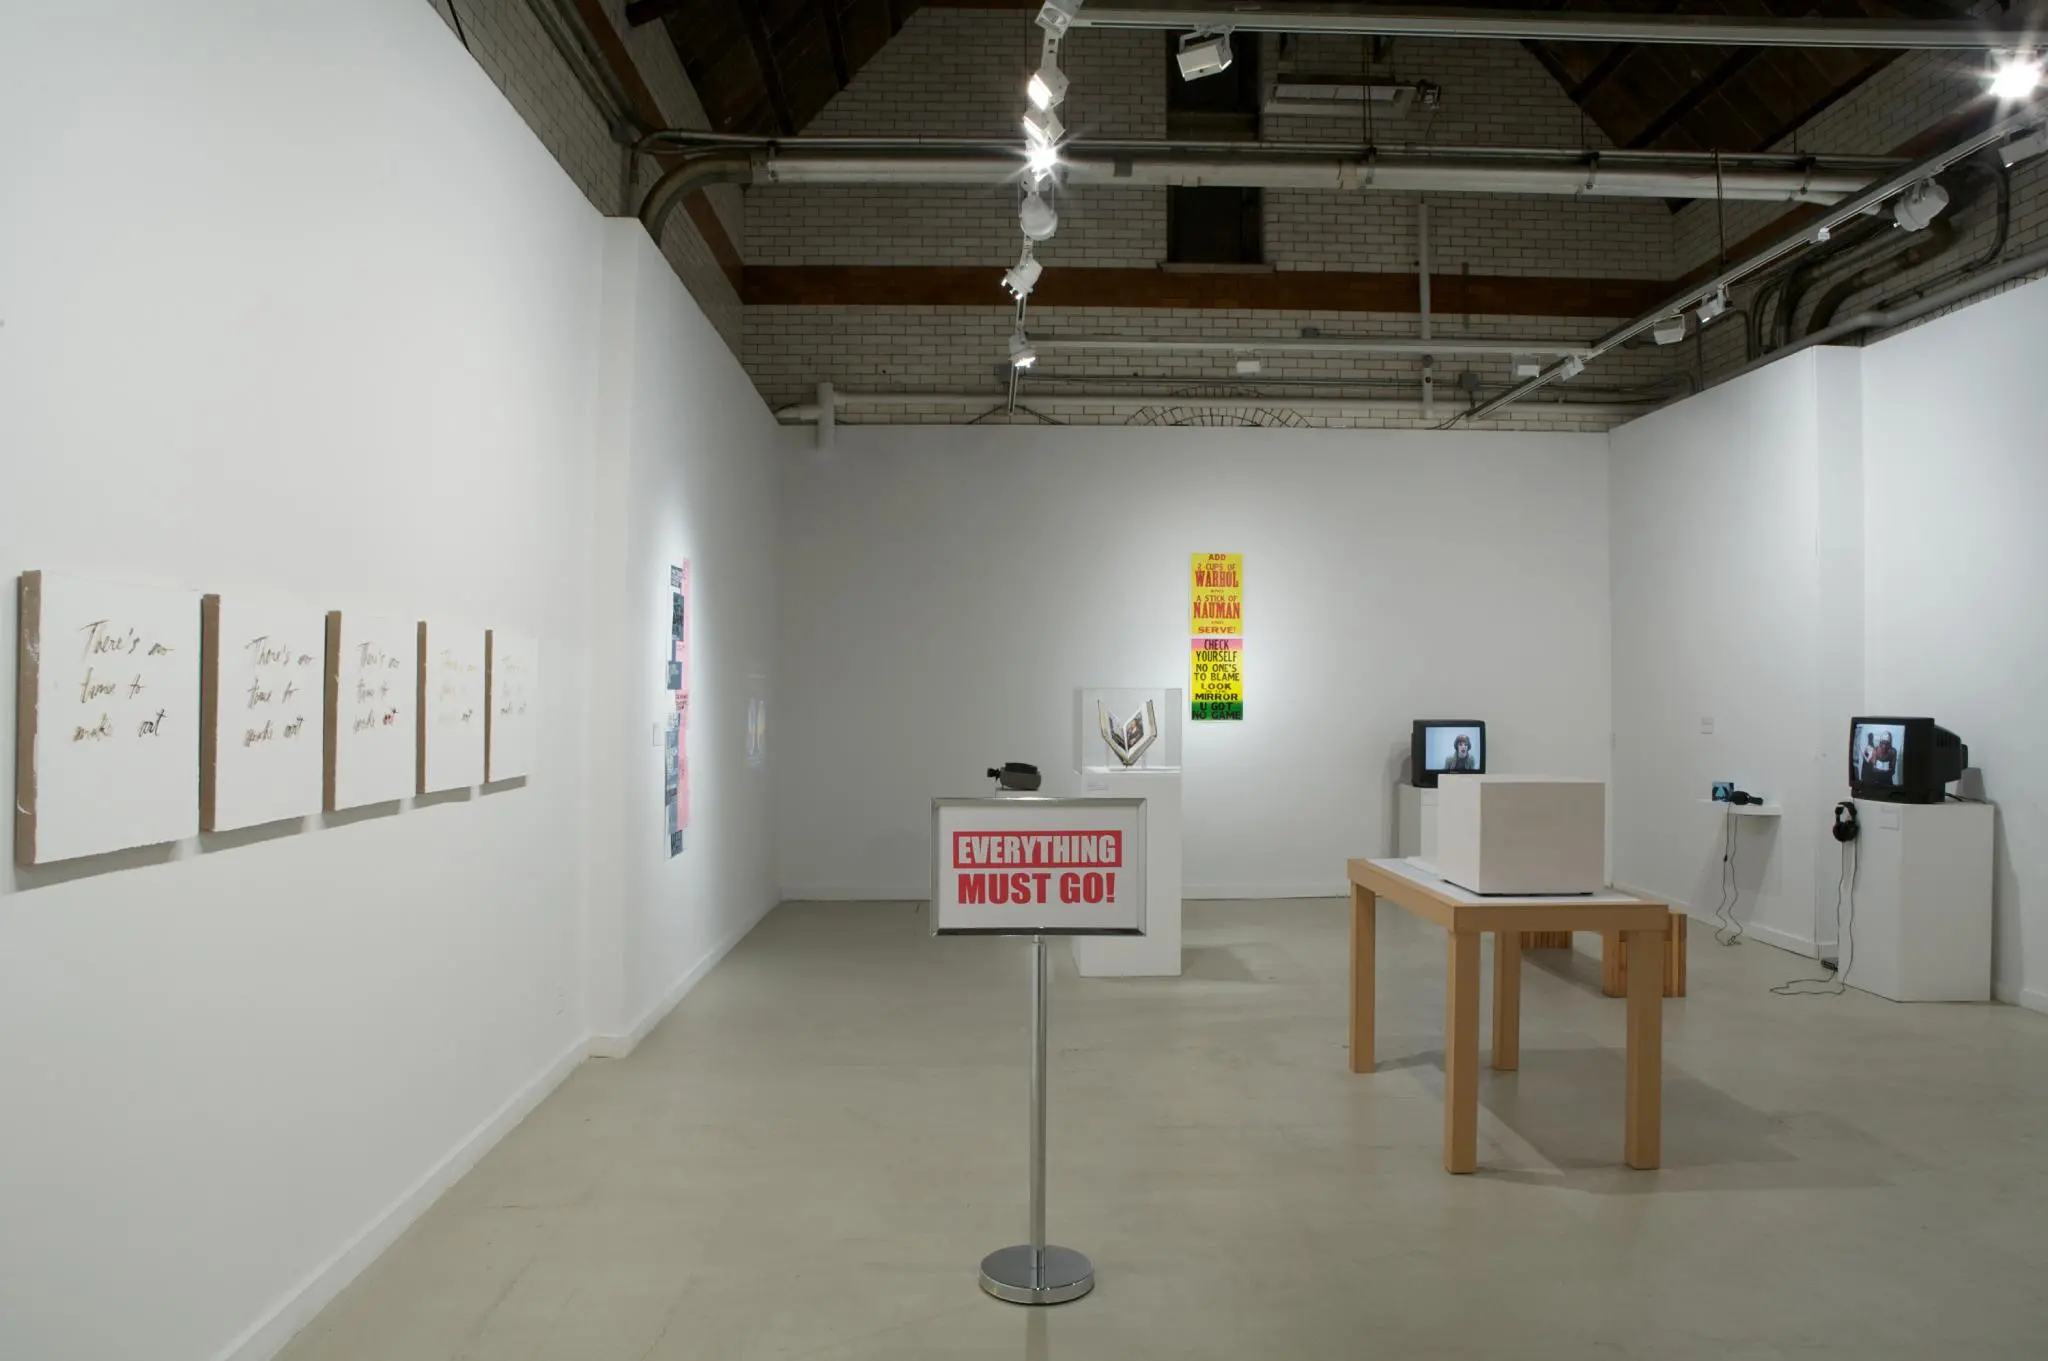 Installation view, "Air Kissing: An Exhibition of Contemporary Art About the Art World", 2008, Spruance Gallery